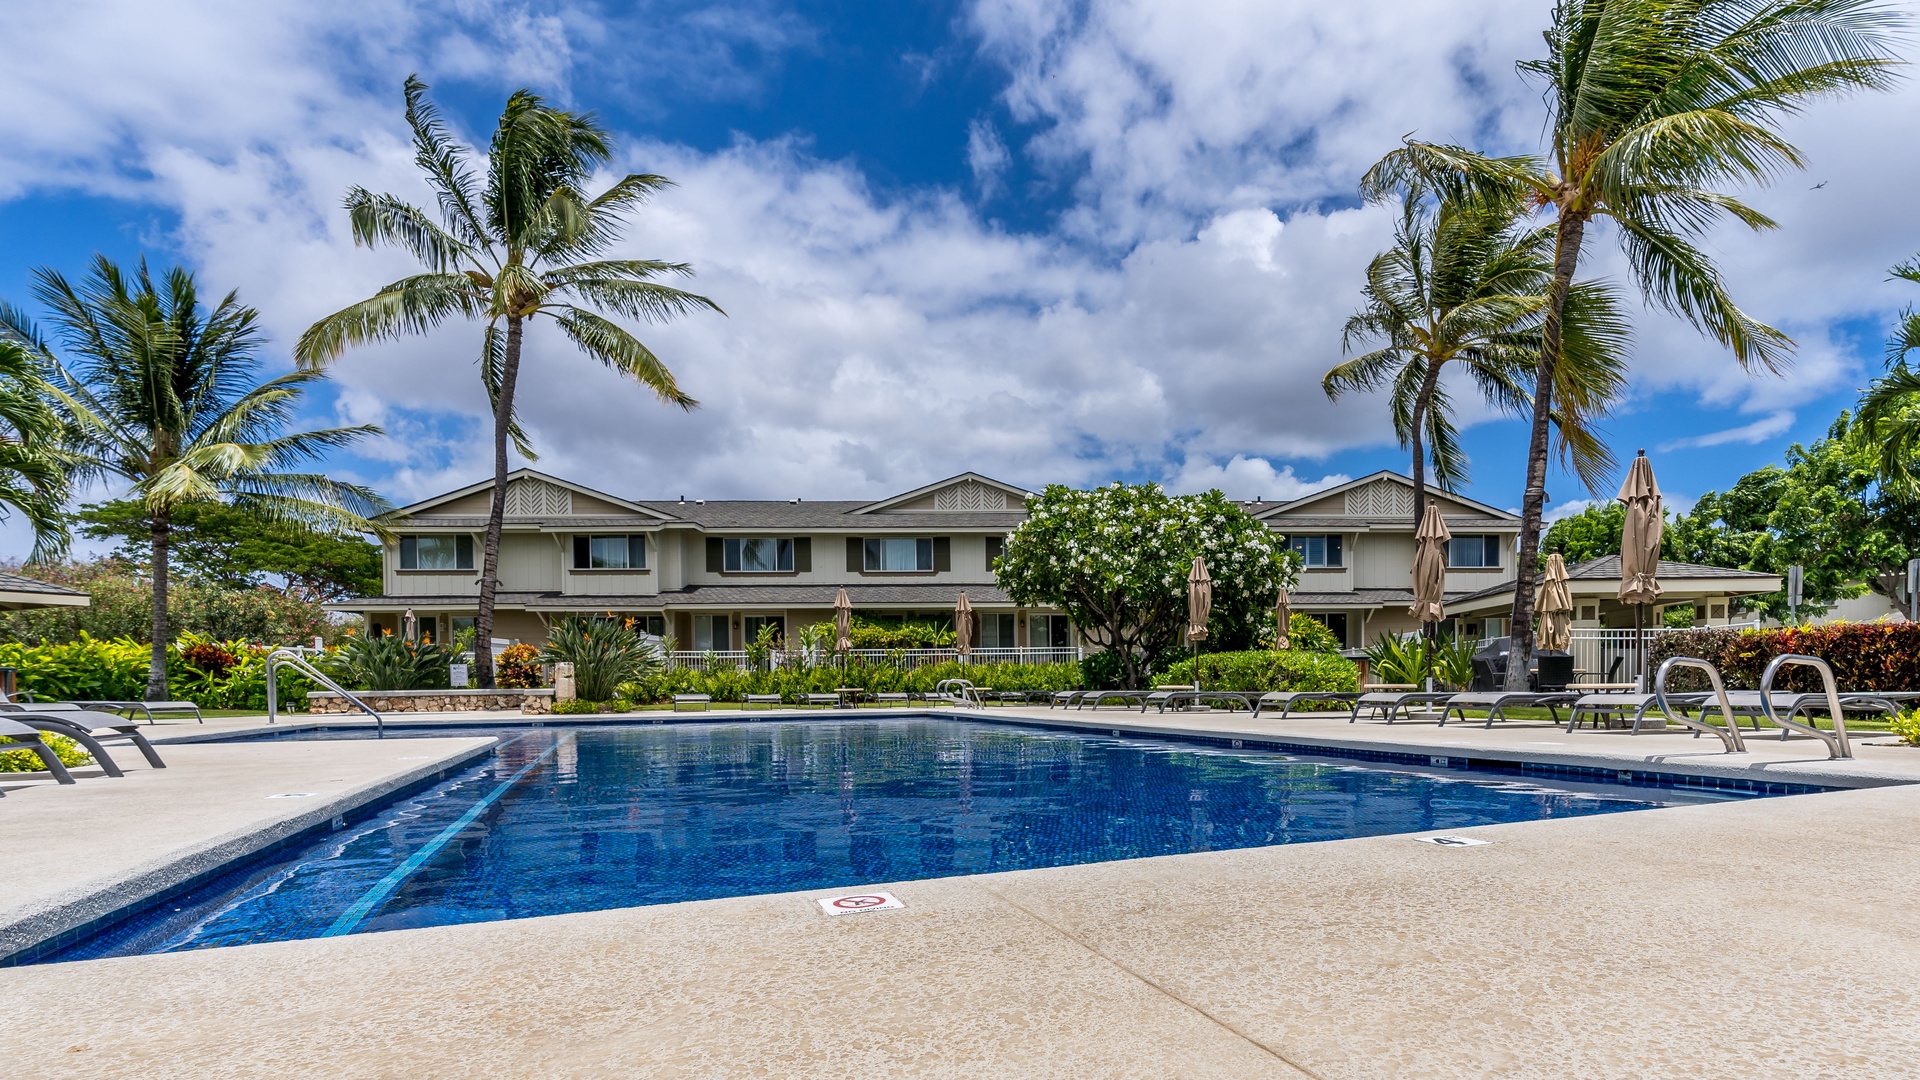 Kapolei Vacation Rentals, Hillside Villas 1508-2 - Relax by the community pool with your favorite book.